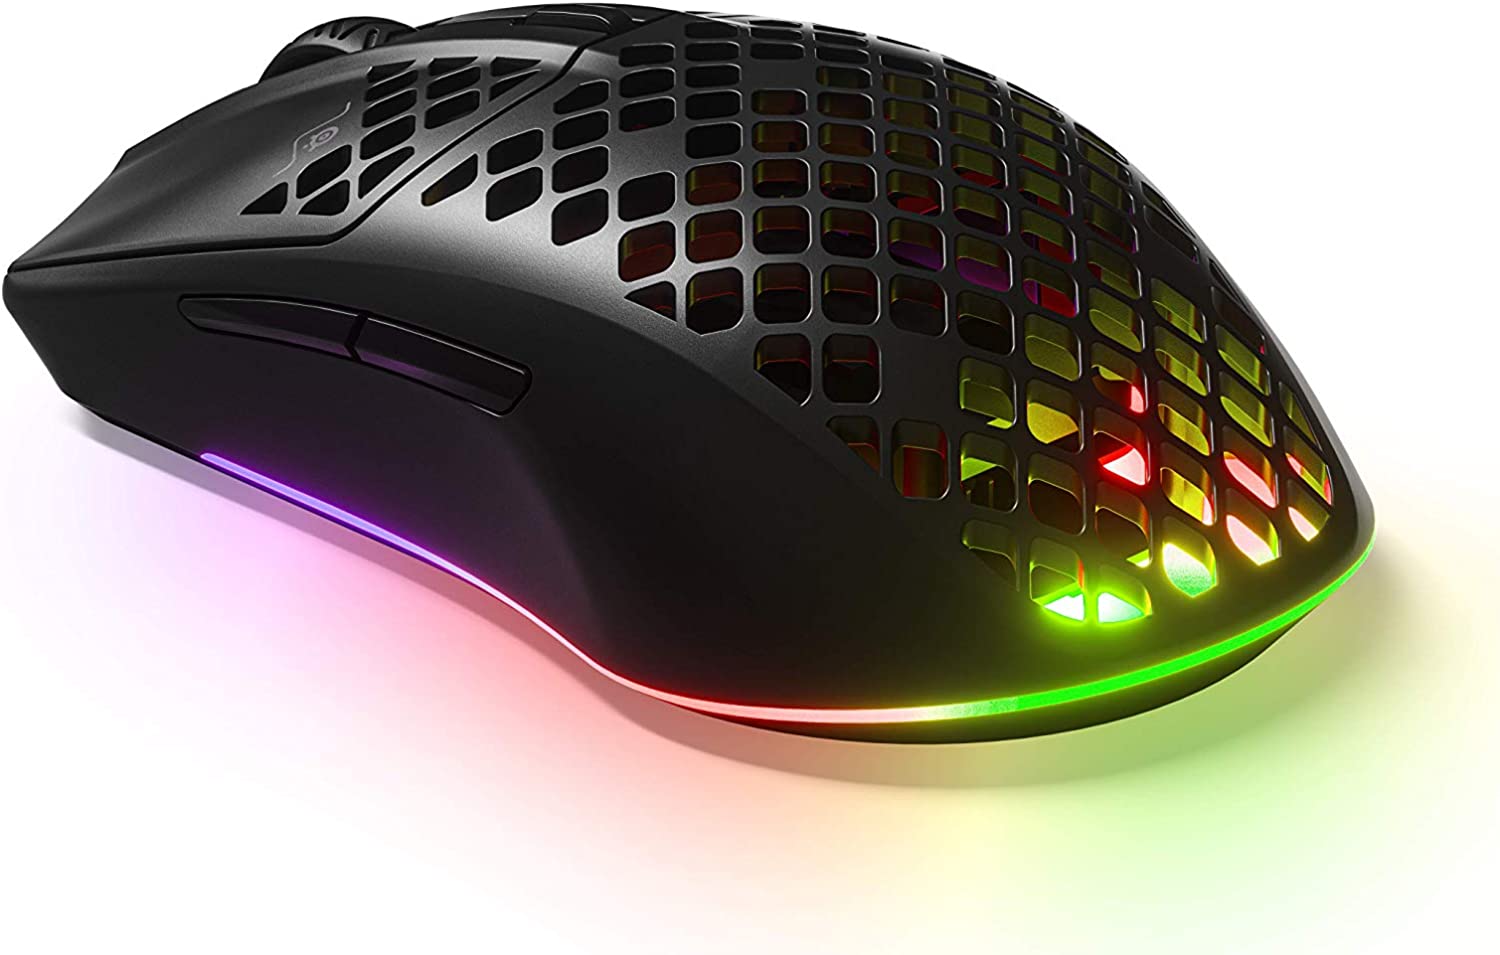 Steelseries Airox 3 Ultralight Wireless Gaming Mouse